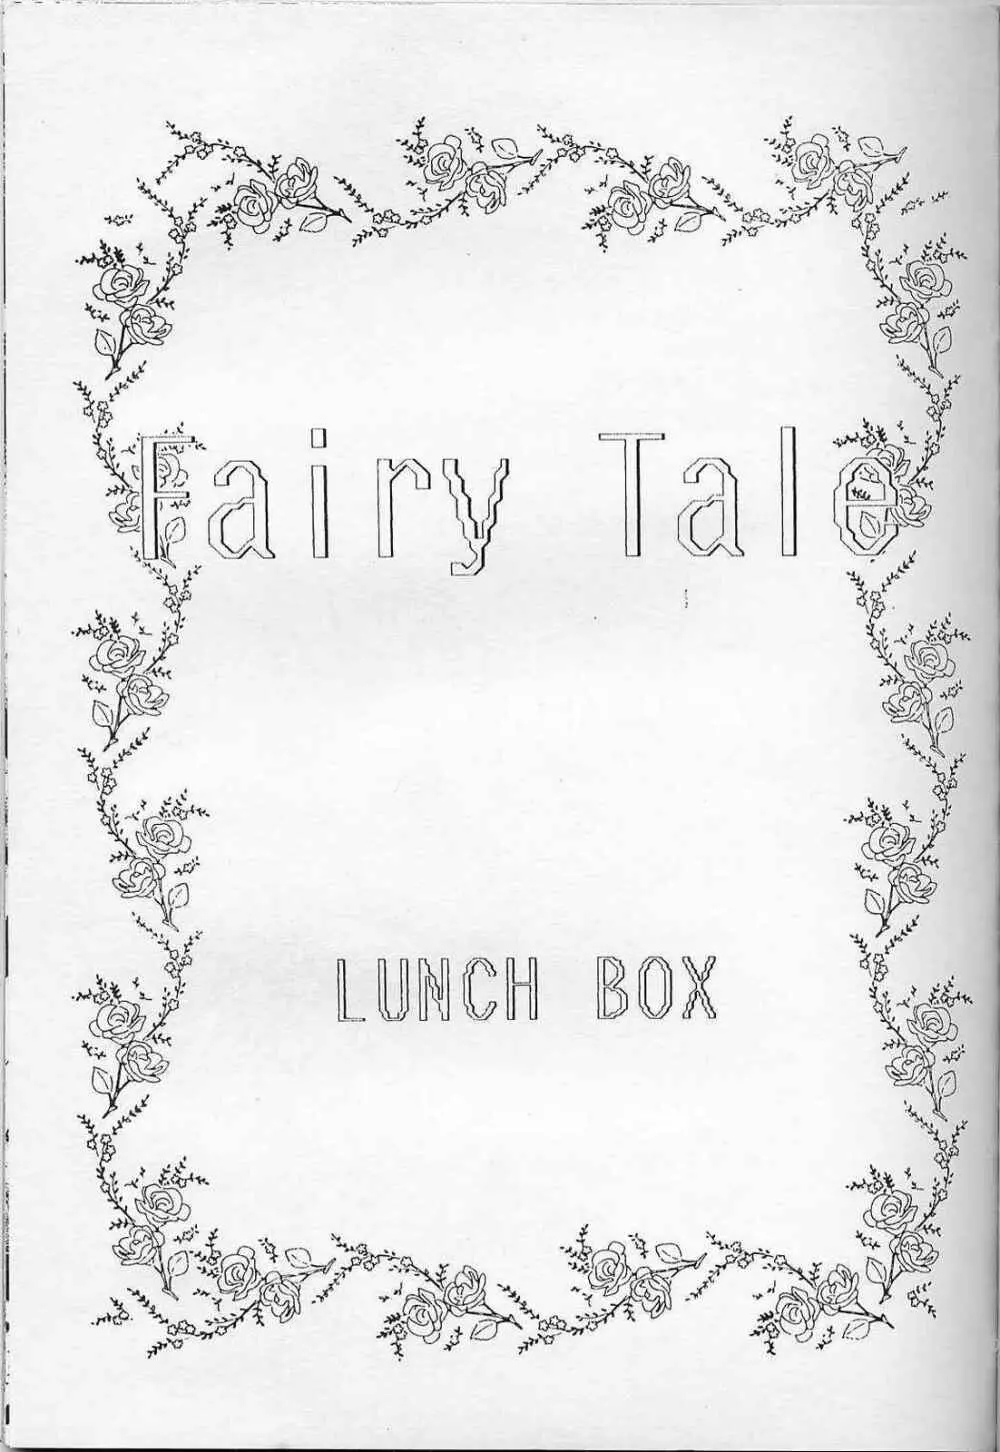 LUNCH BOX 7 - Fairy Tale Page.2